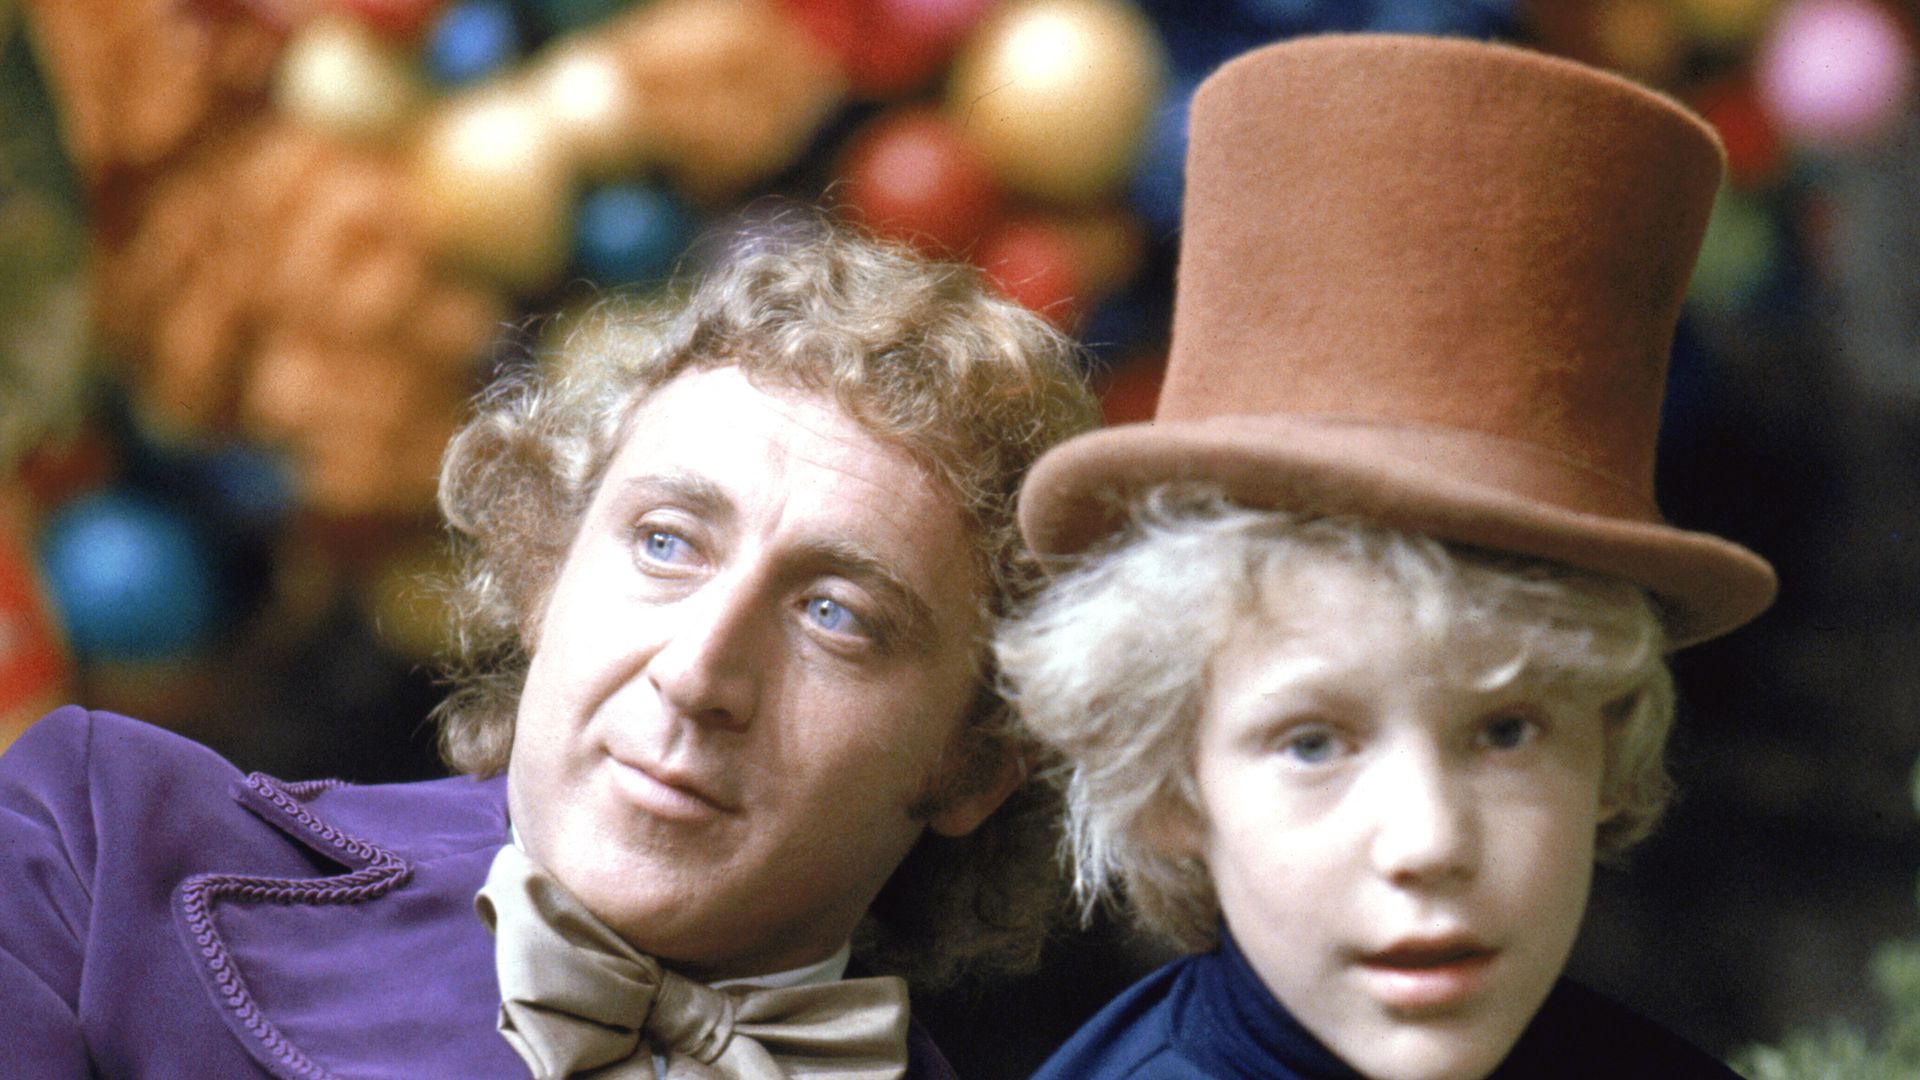 Gene Wilder as Willy Wonka sat with Peter Ostrum, who has character's hat on